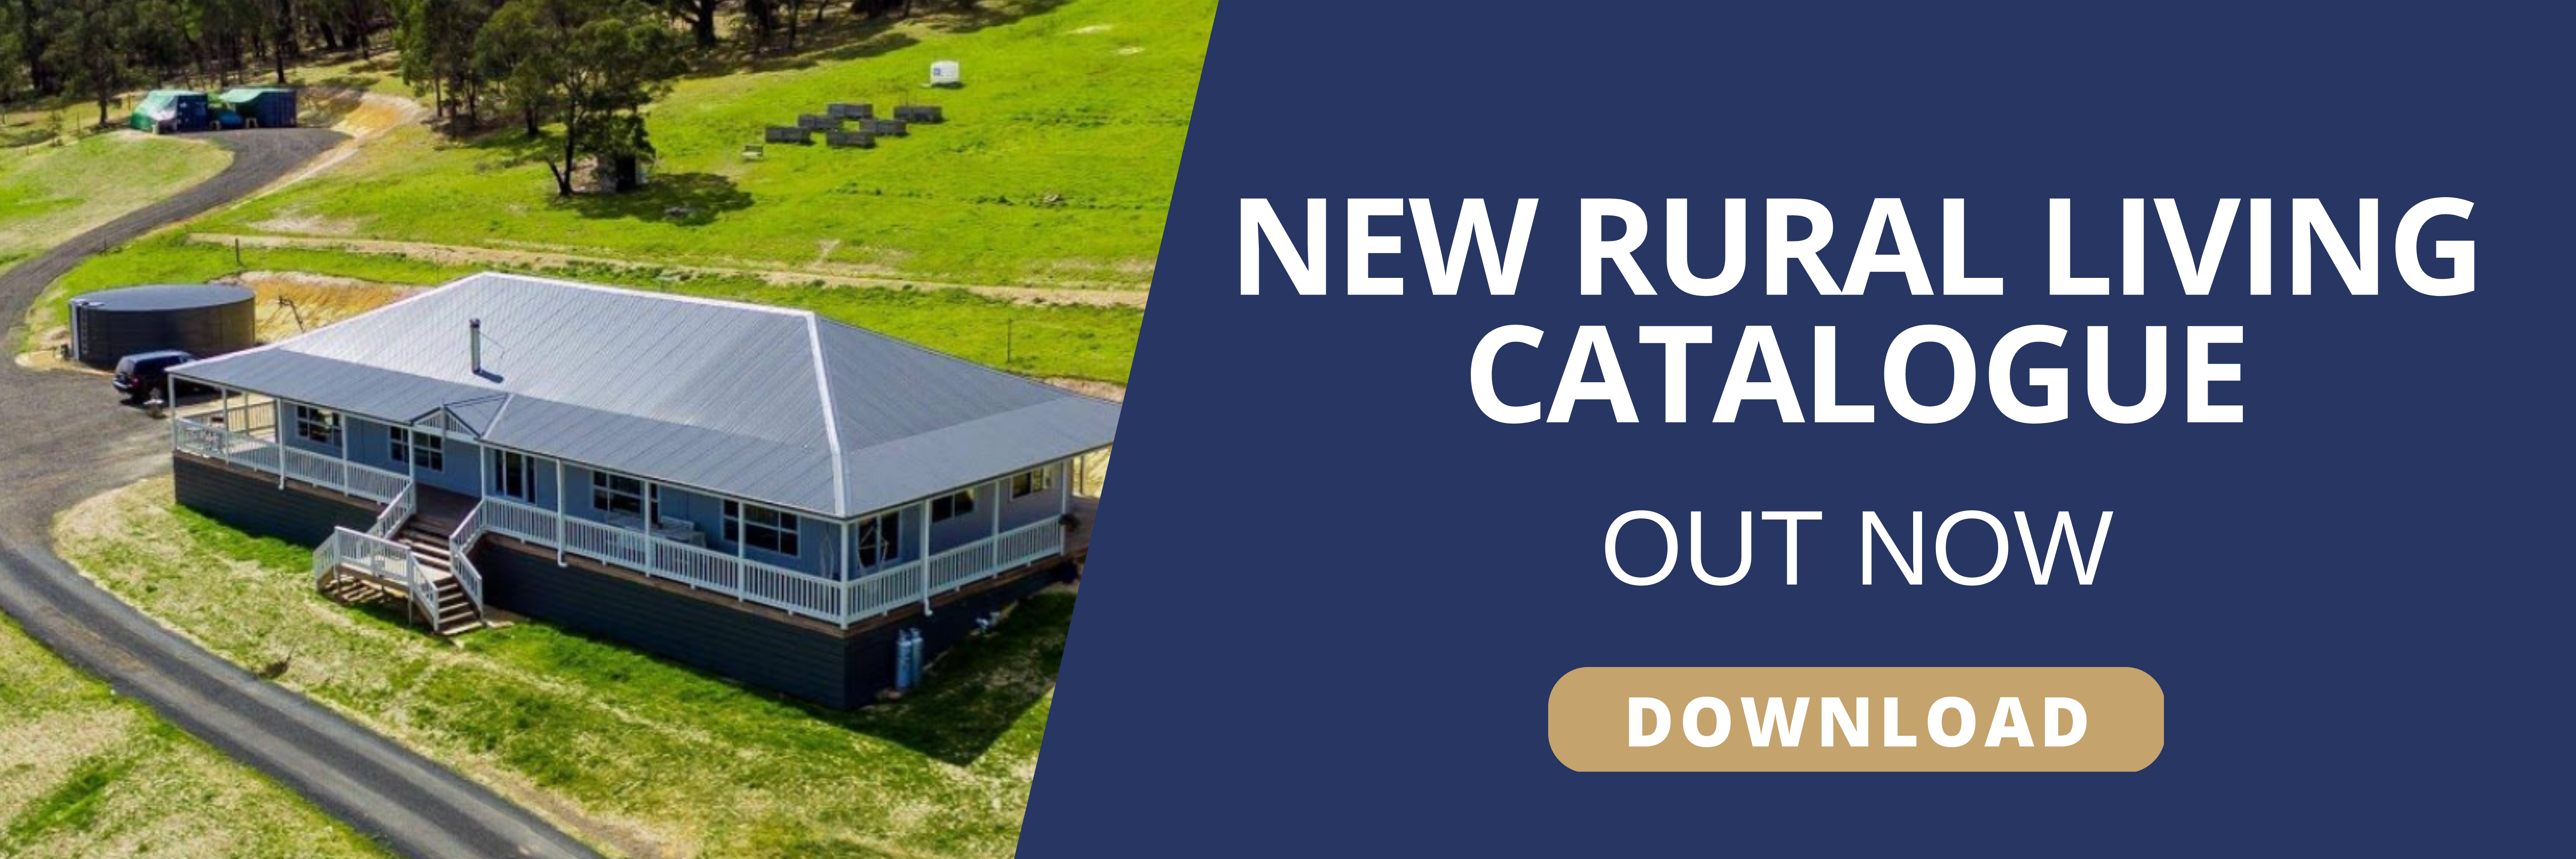 NEW RURAL LIVING CATALOGUE OUT NOW